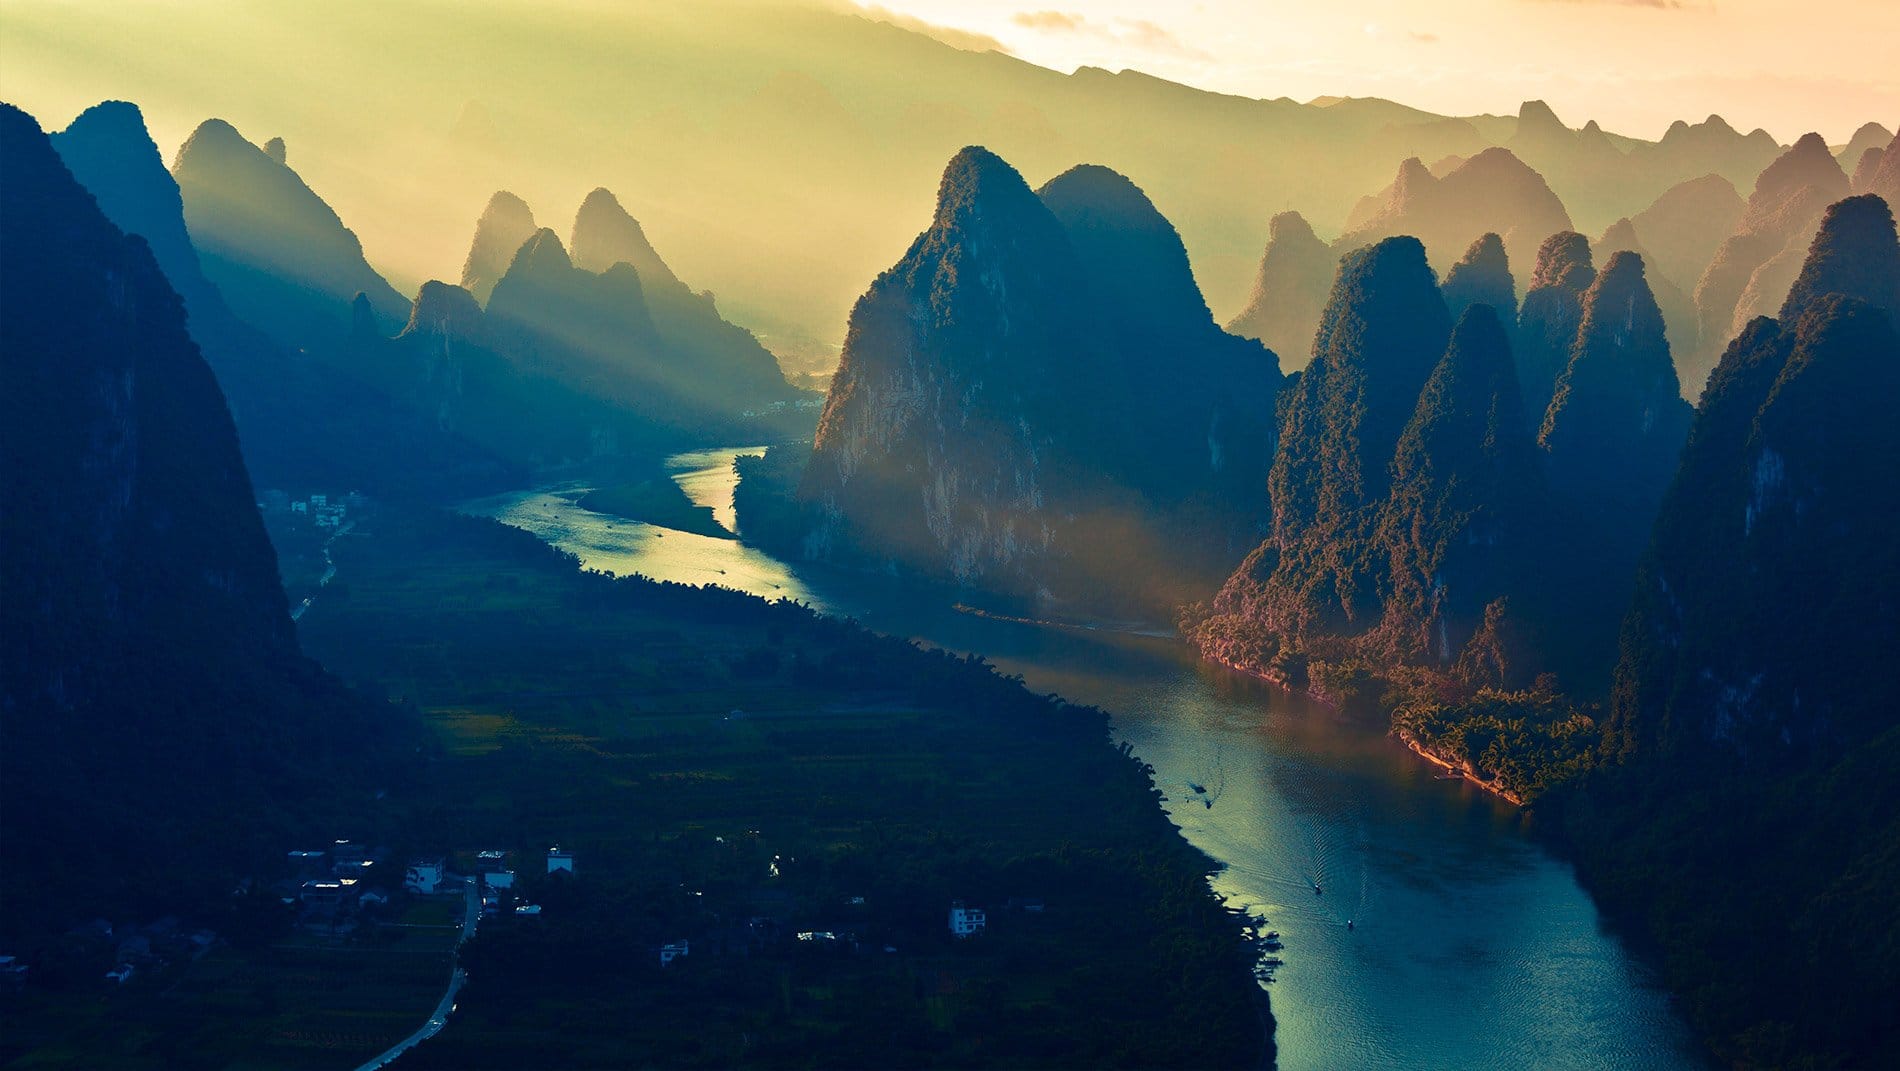 Karst Mountains~The erosion of a massive limestone block over tens of millions of years has left a phantasmagorical landscape of vegetation-encrusted towers and cones sowed together by a meandering river irrigating bountiful fields of fruit, rice and vegetables.